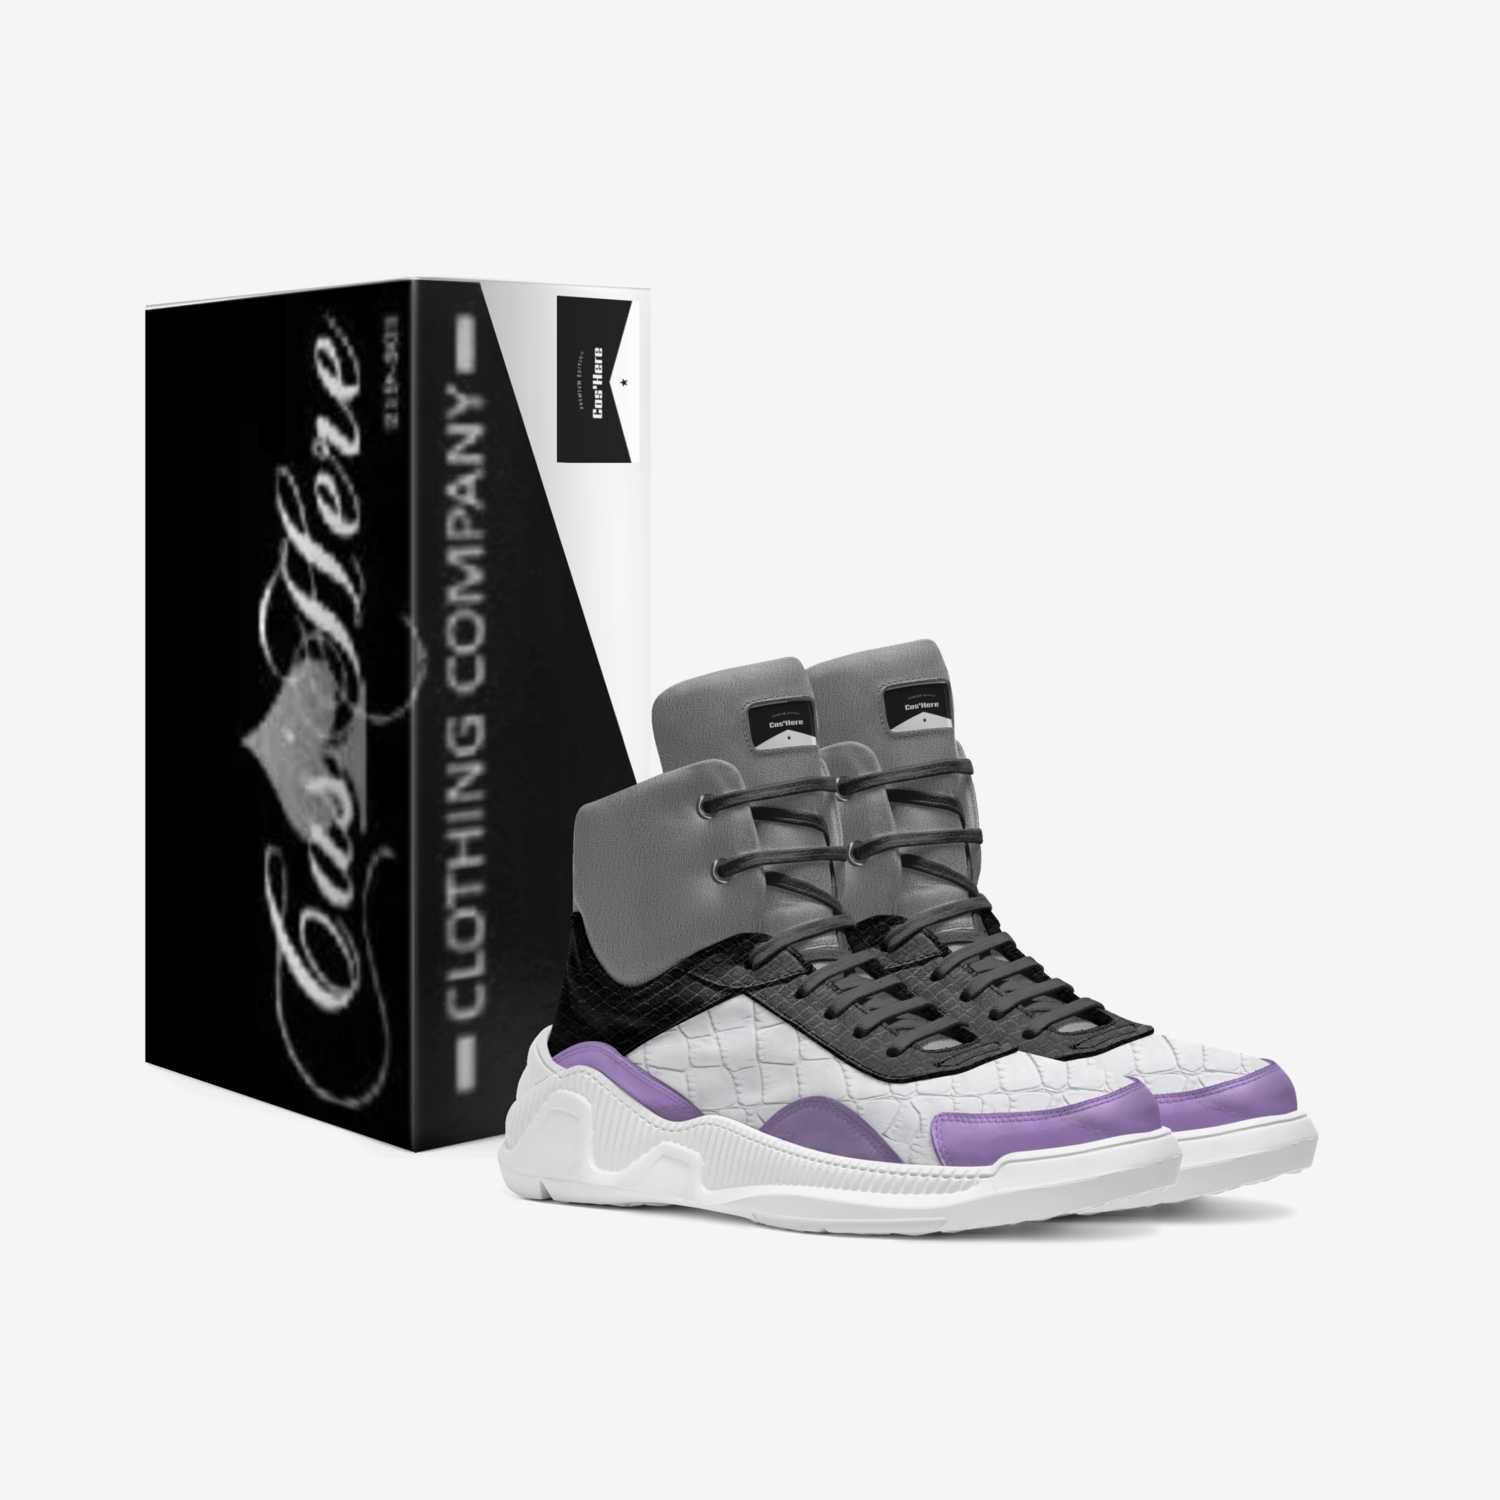 Cas'Here Euro-Step custom made in Italy shoes by Brandon Keyes | Box view